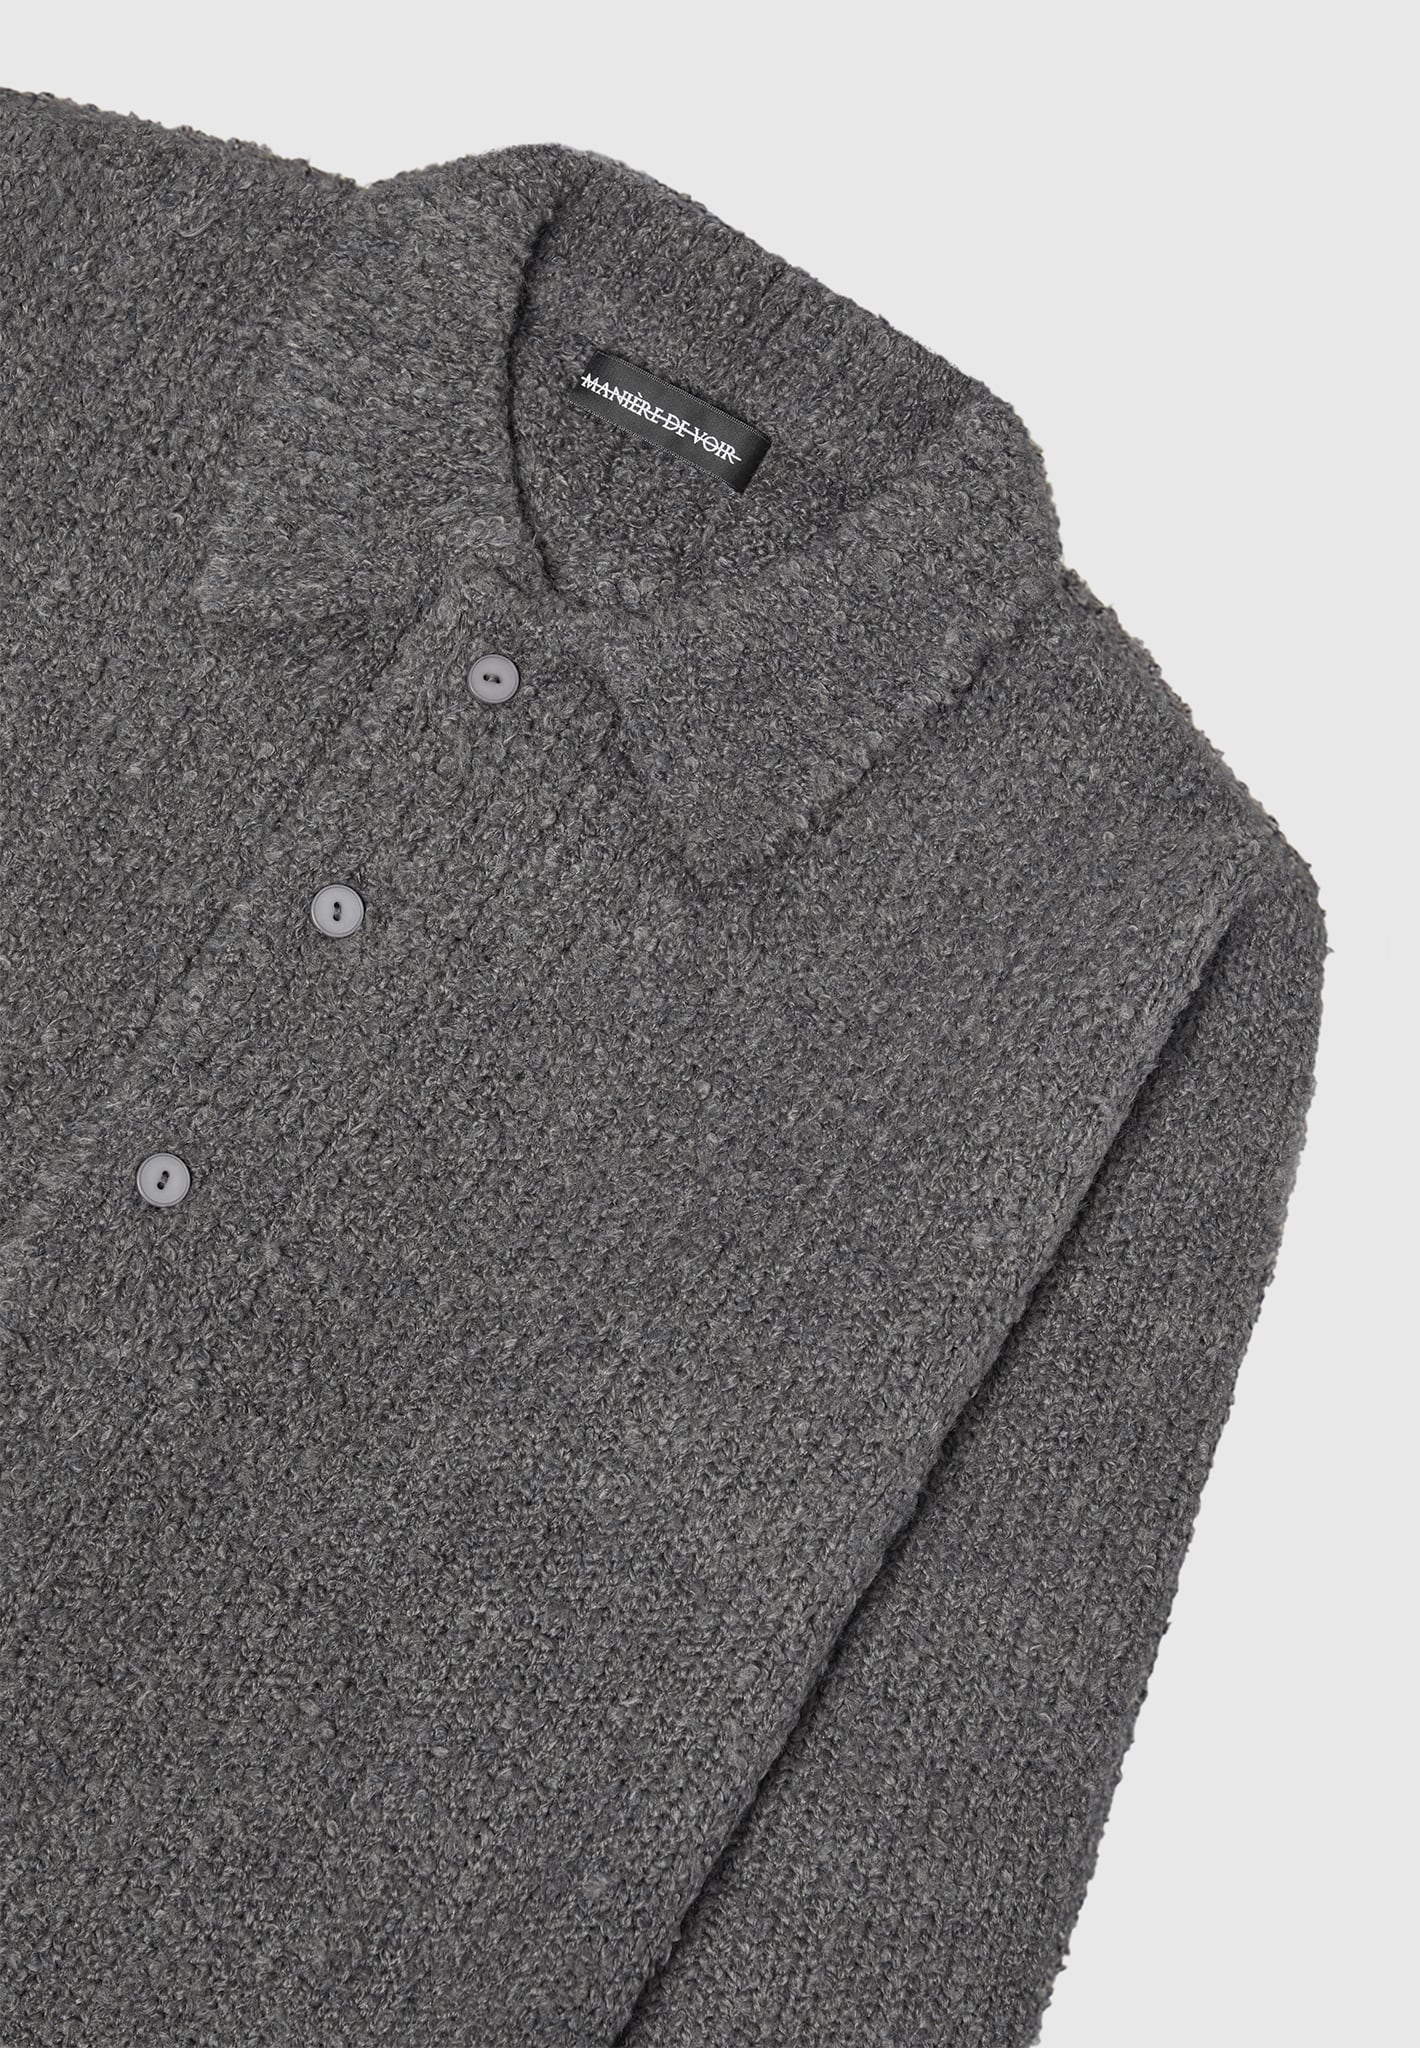 boucle-knit-button-up-cardigan-grey